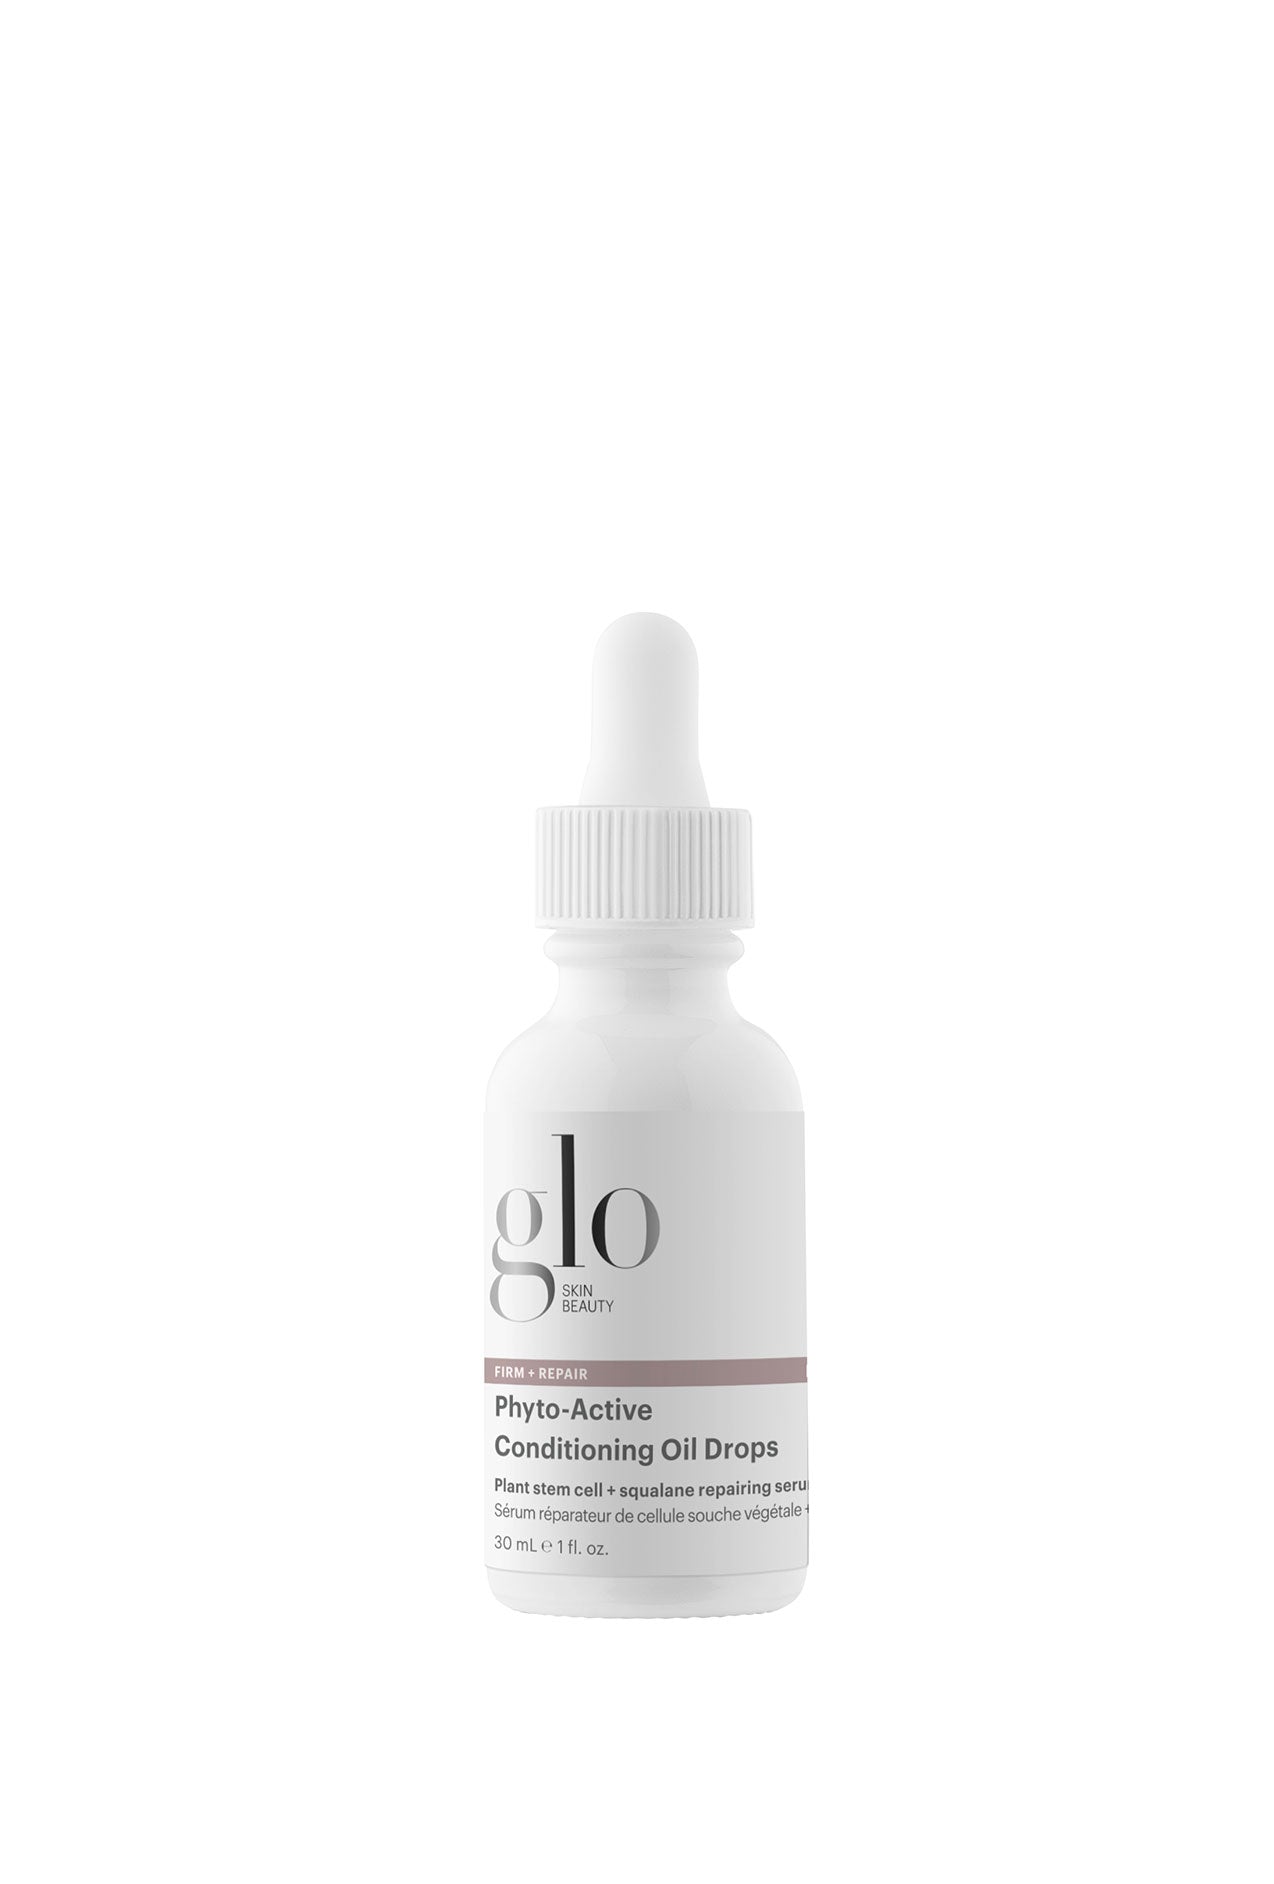 Phyto-Active Conditioning Oil Drops